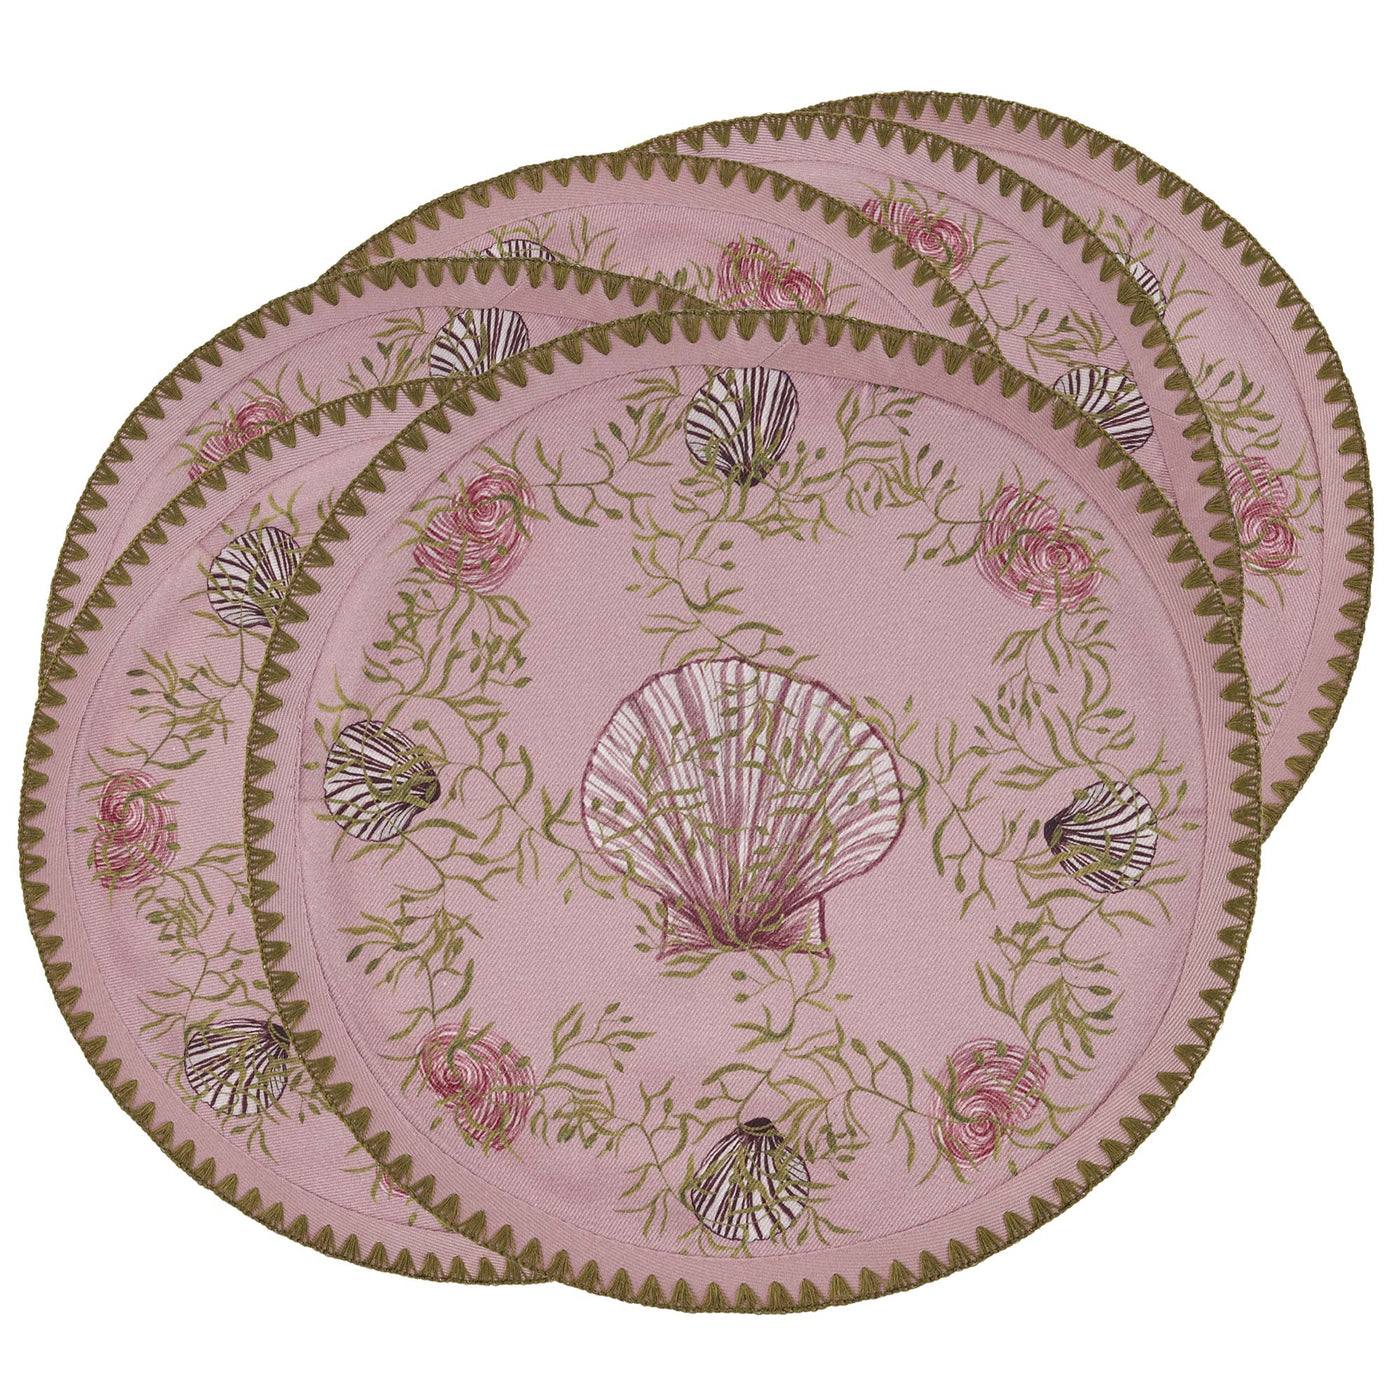 Round Placemats Mussels from Brussels (Set of 6)